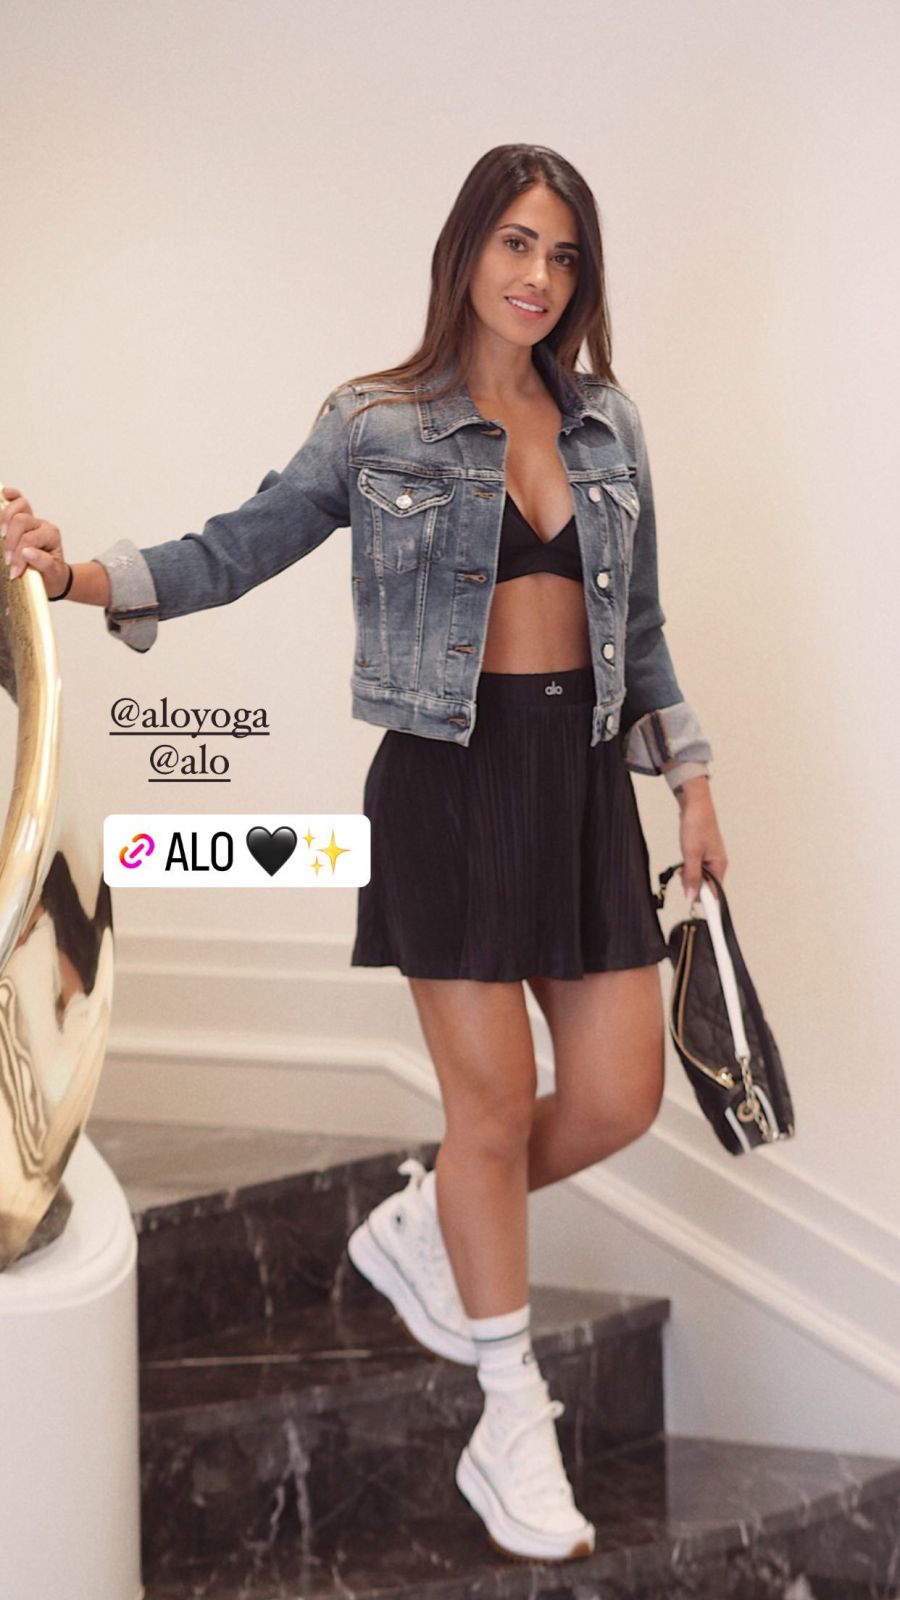 Antonela Roccuzzo made an impact with a set with a tennis skirt and jean jacket